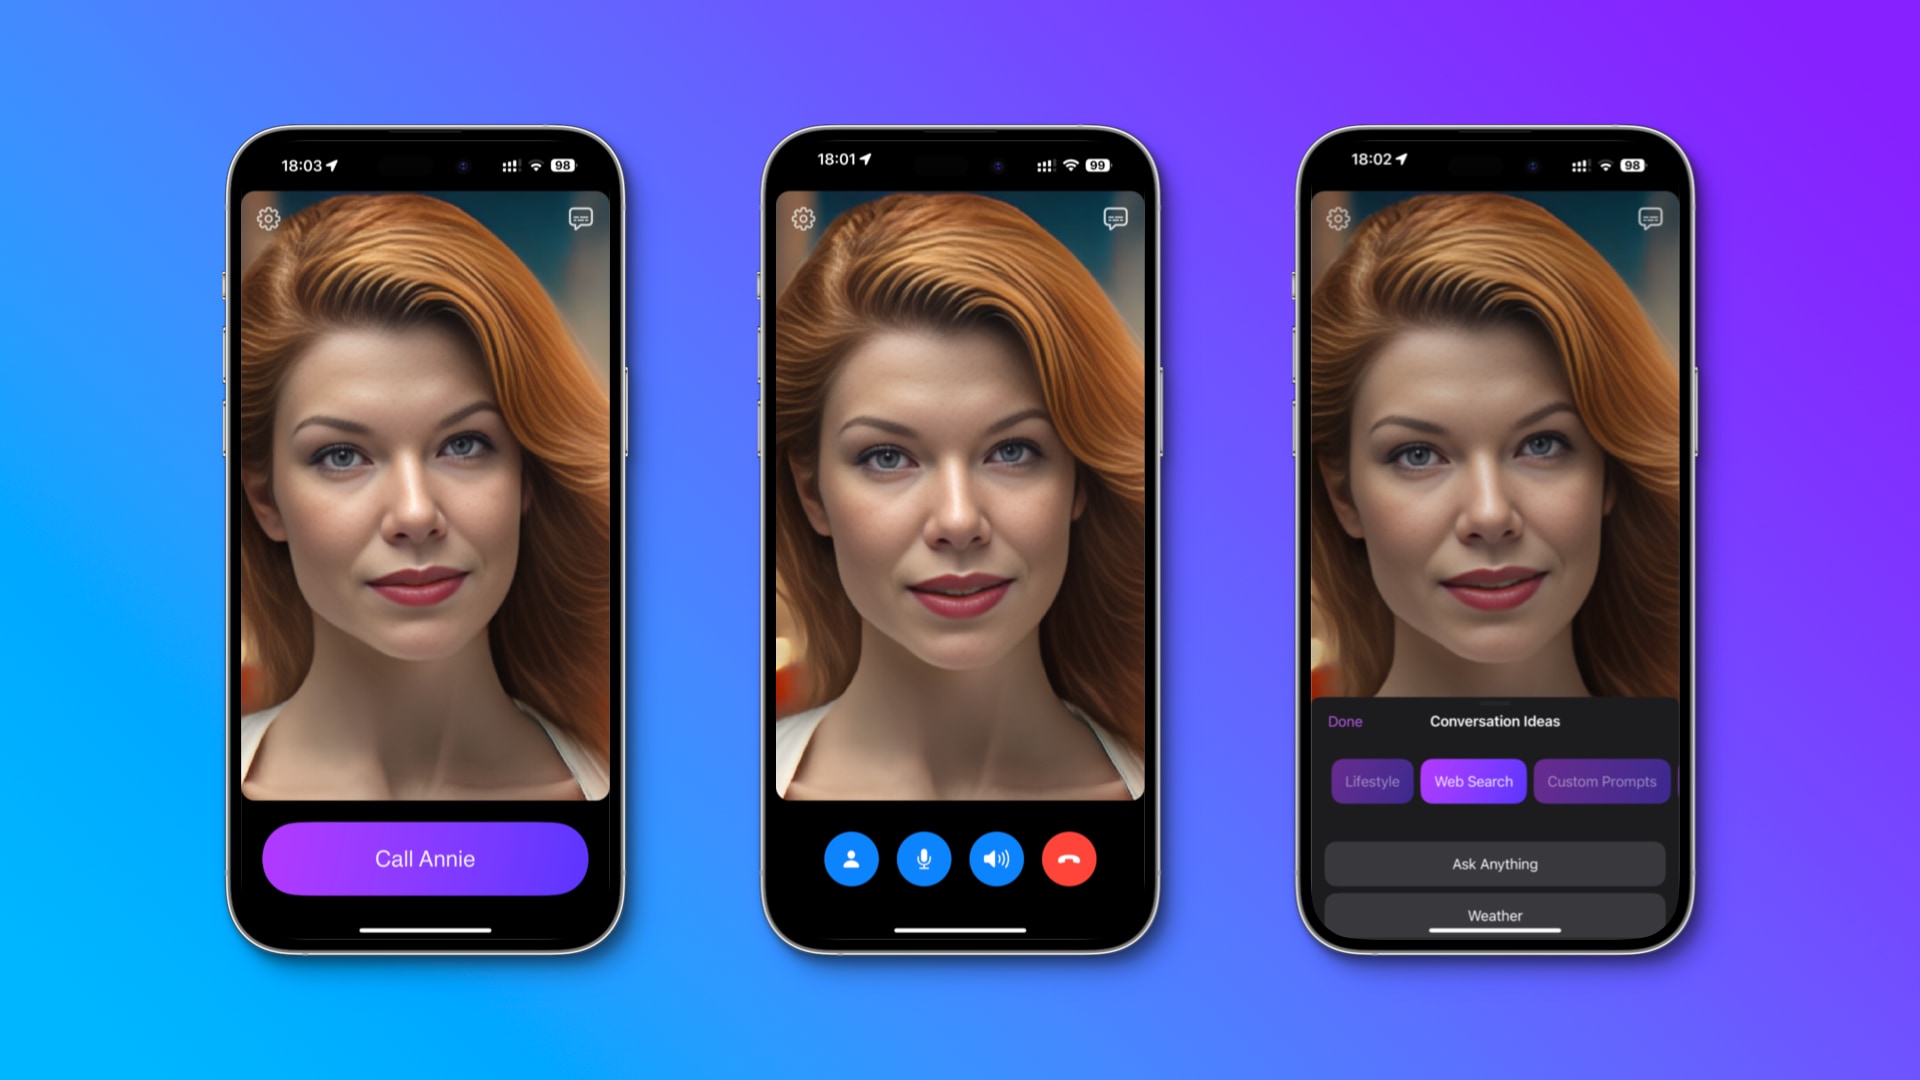 Three iPhone screenshots showing the ChatGPT-based AI avatar in the Call Annie app